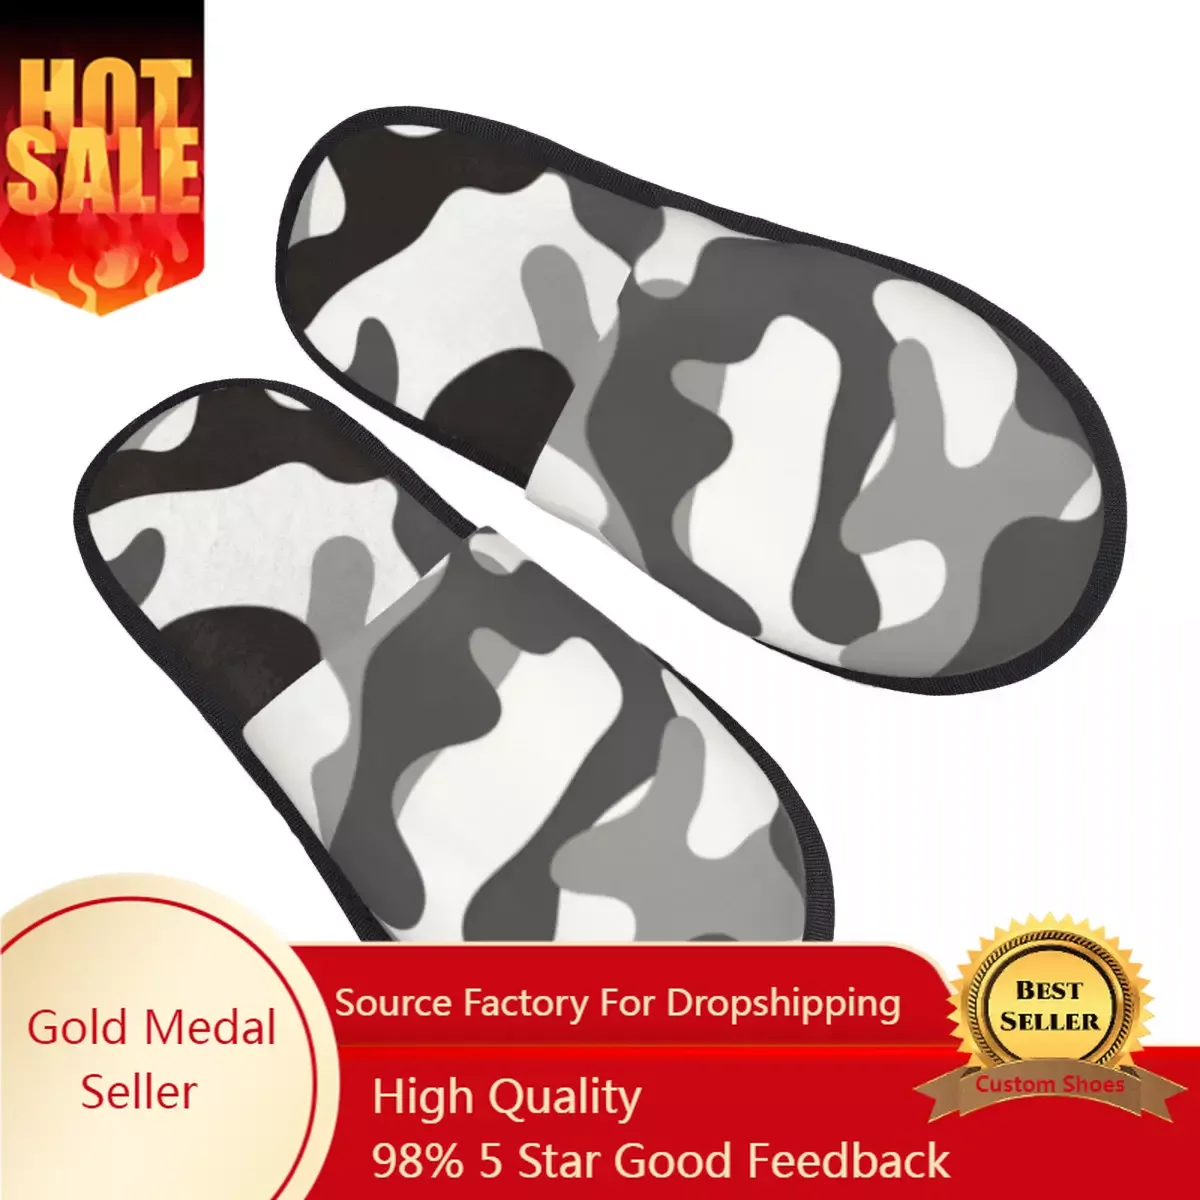 

Print Women Urban Camo House Slippers Cozy Warm Multicam Camouflage Memory Foam Fluffy Slipper Indoor Outdoor Shoes